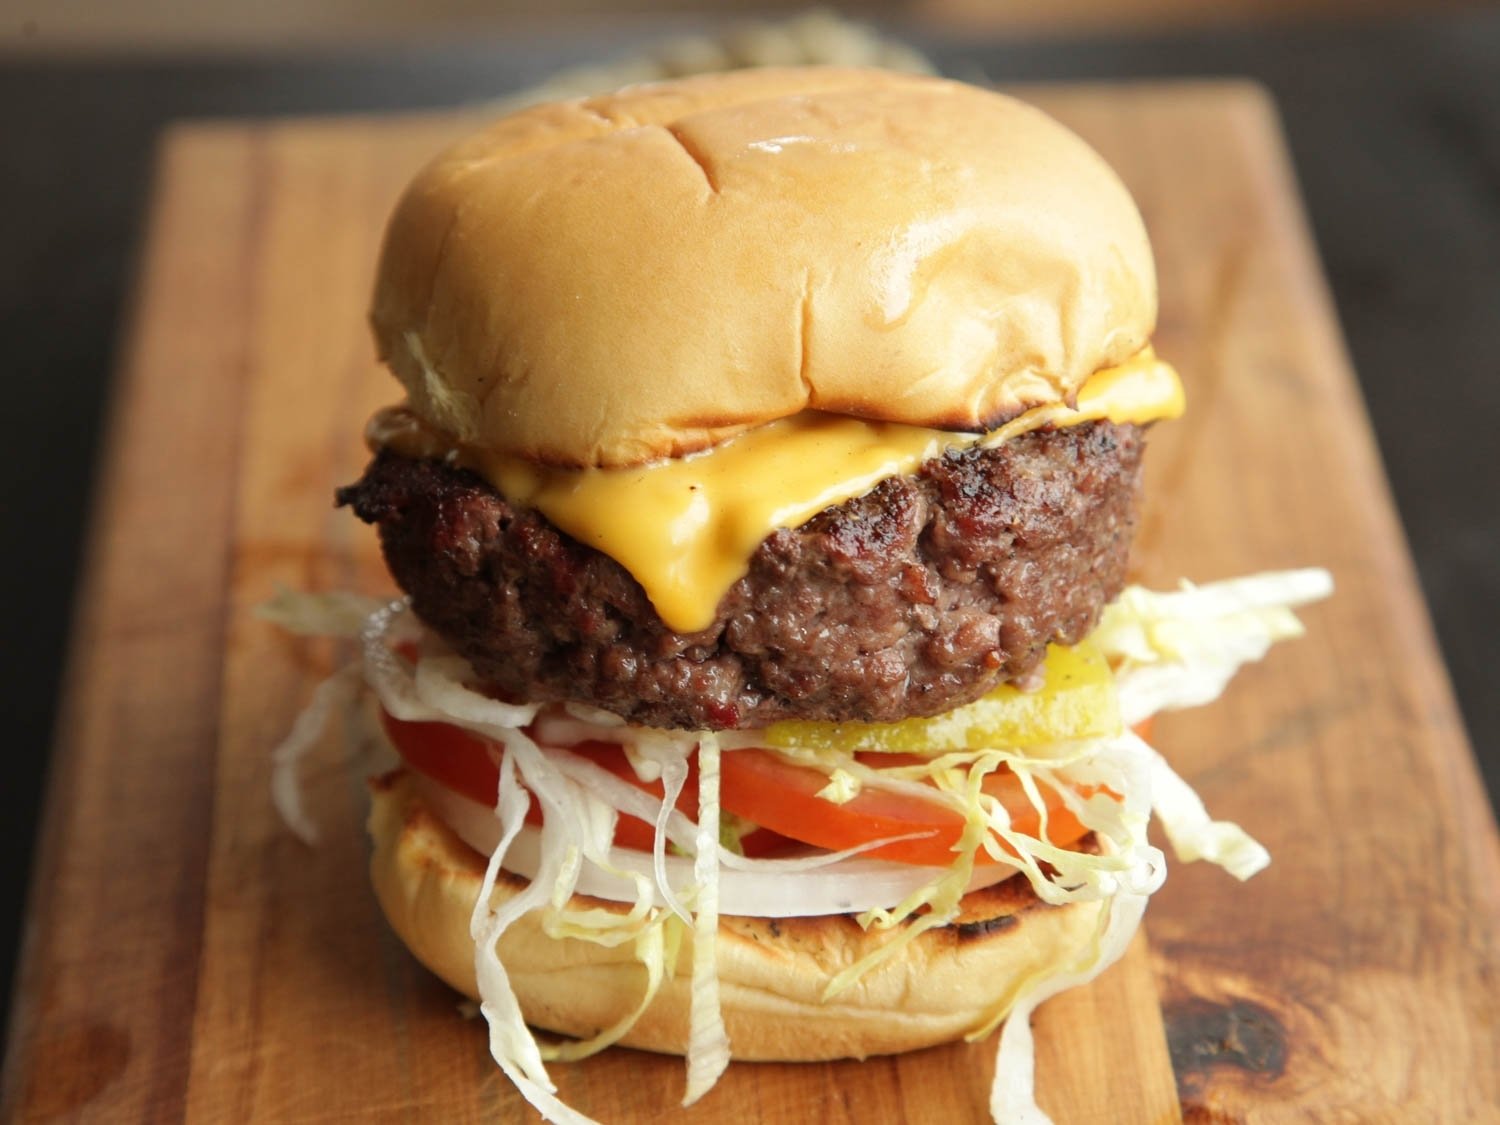 10 Attractive Burger Ideas For The Grill 15 grilled burger recipes for memorial day serious eats 1 2022